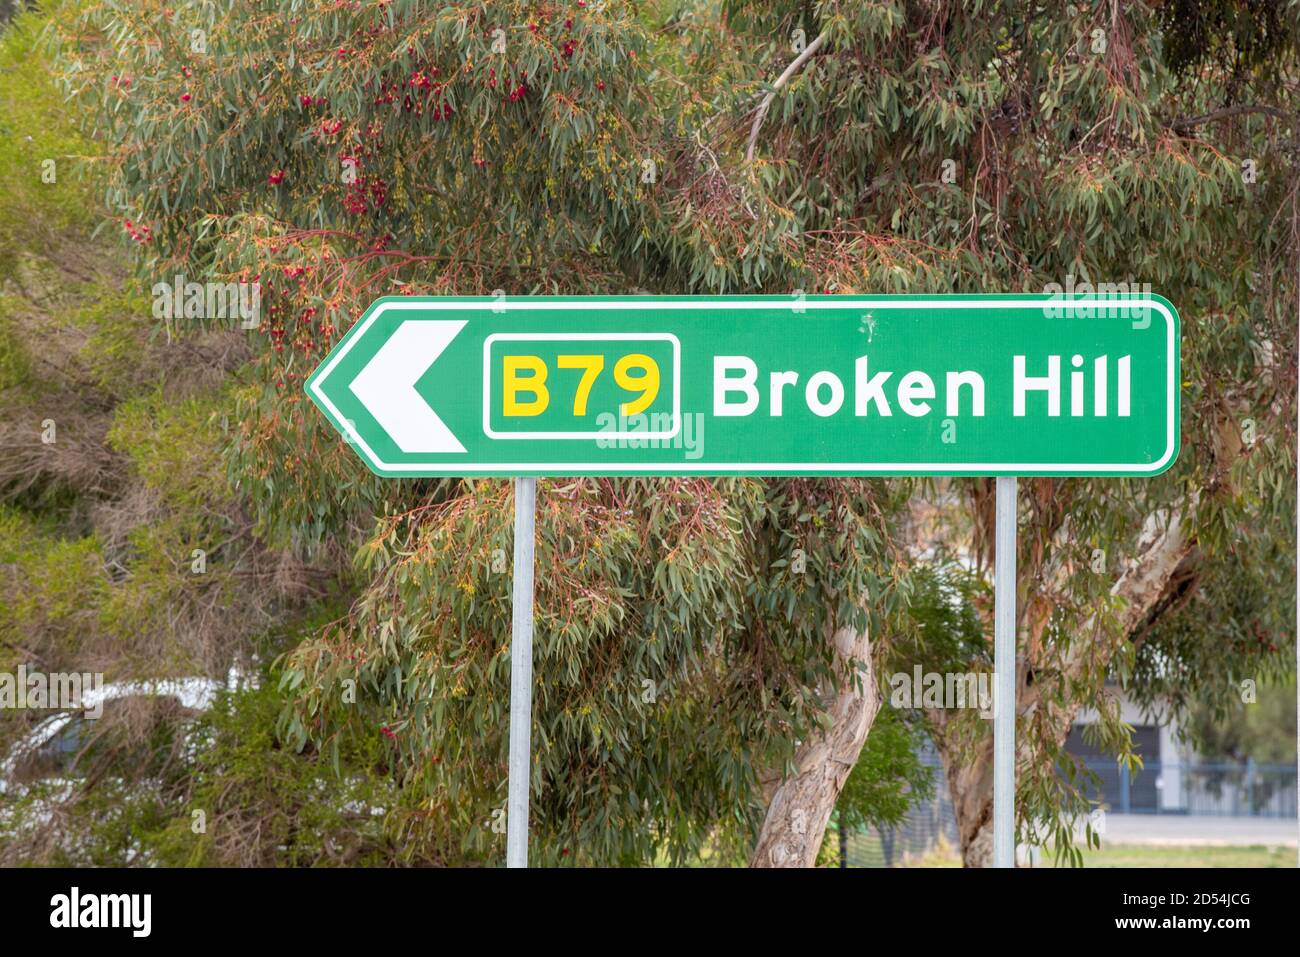 Road sign for Broken Hill on the B79 Silver City Highway in New South Wales Australia Stock Photo